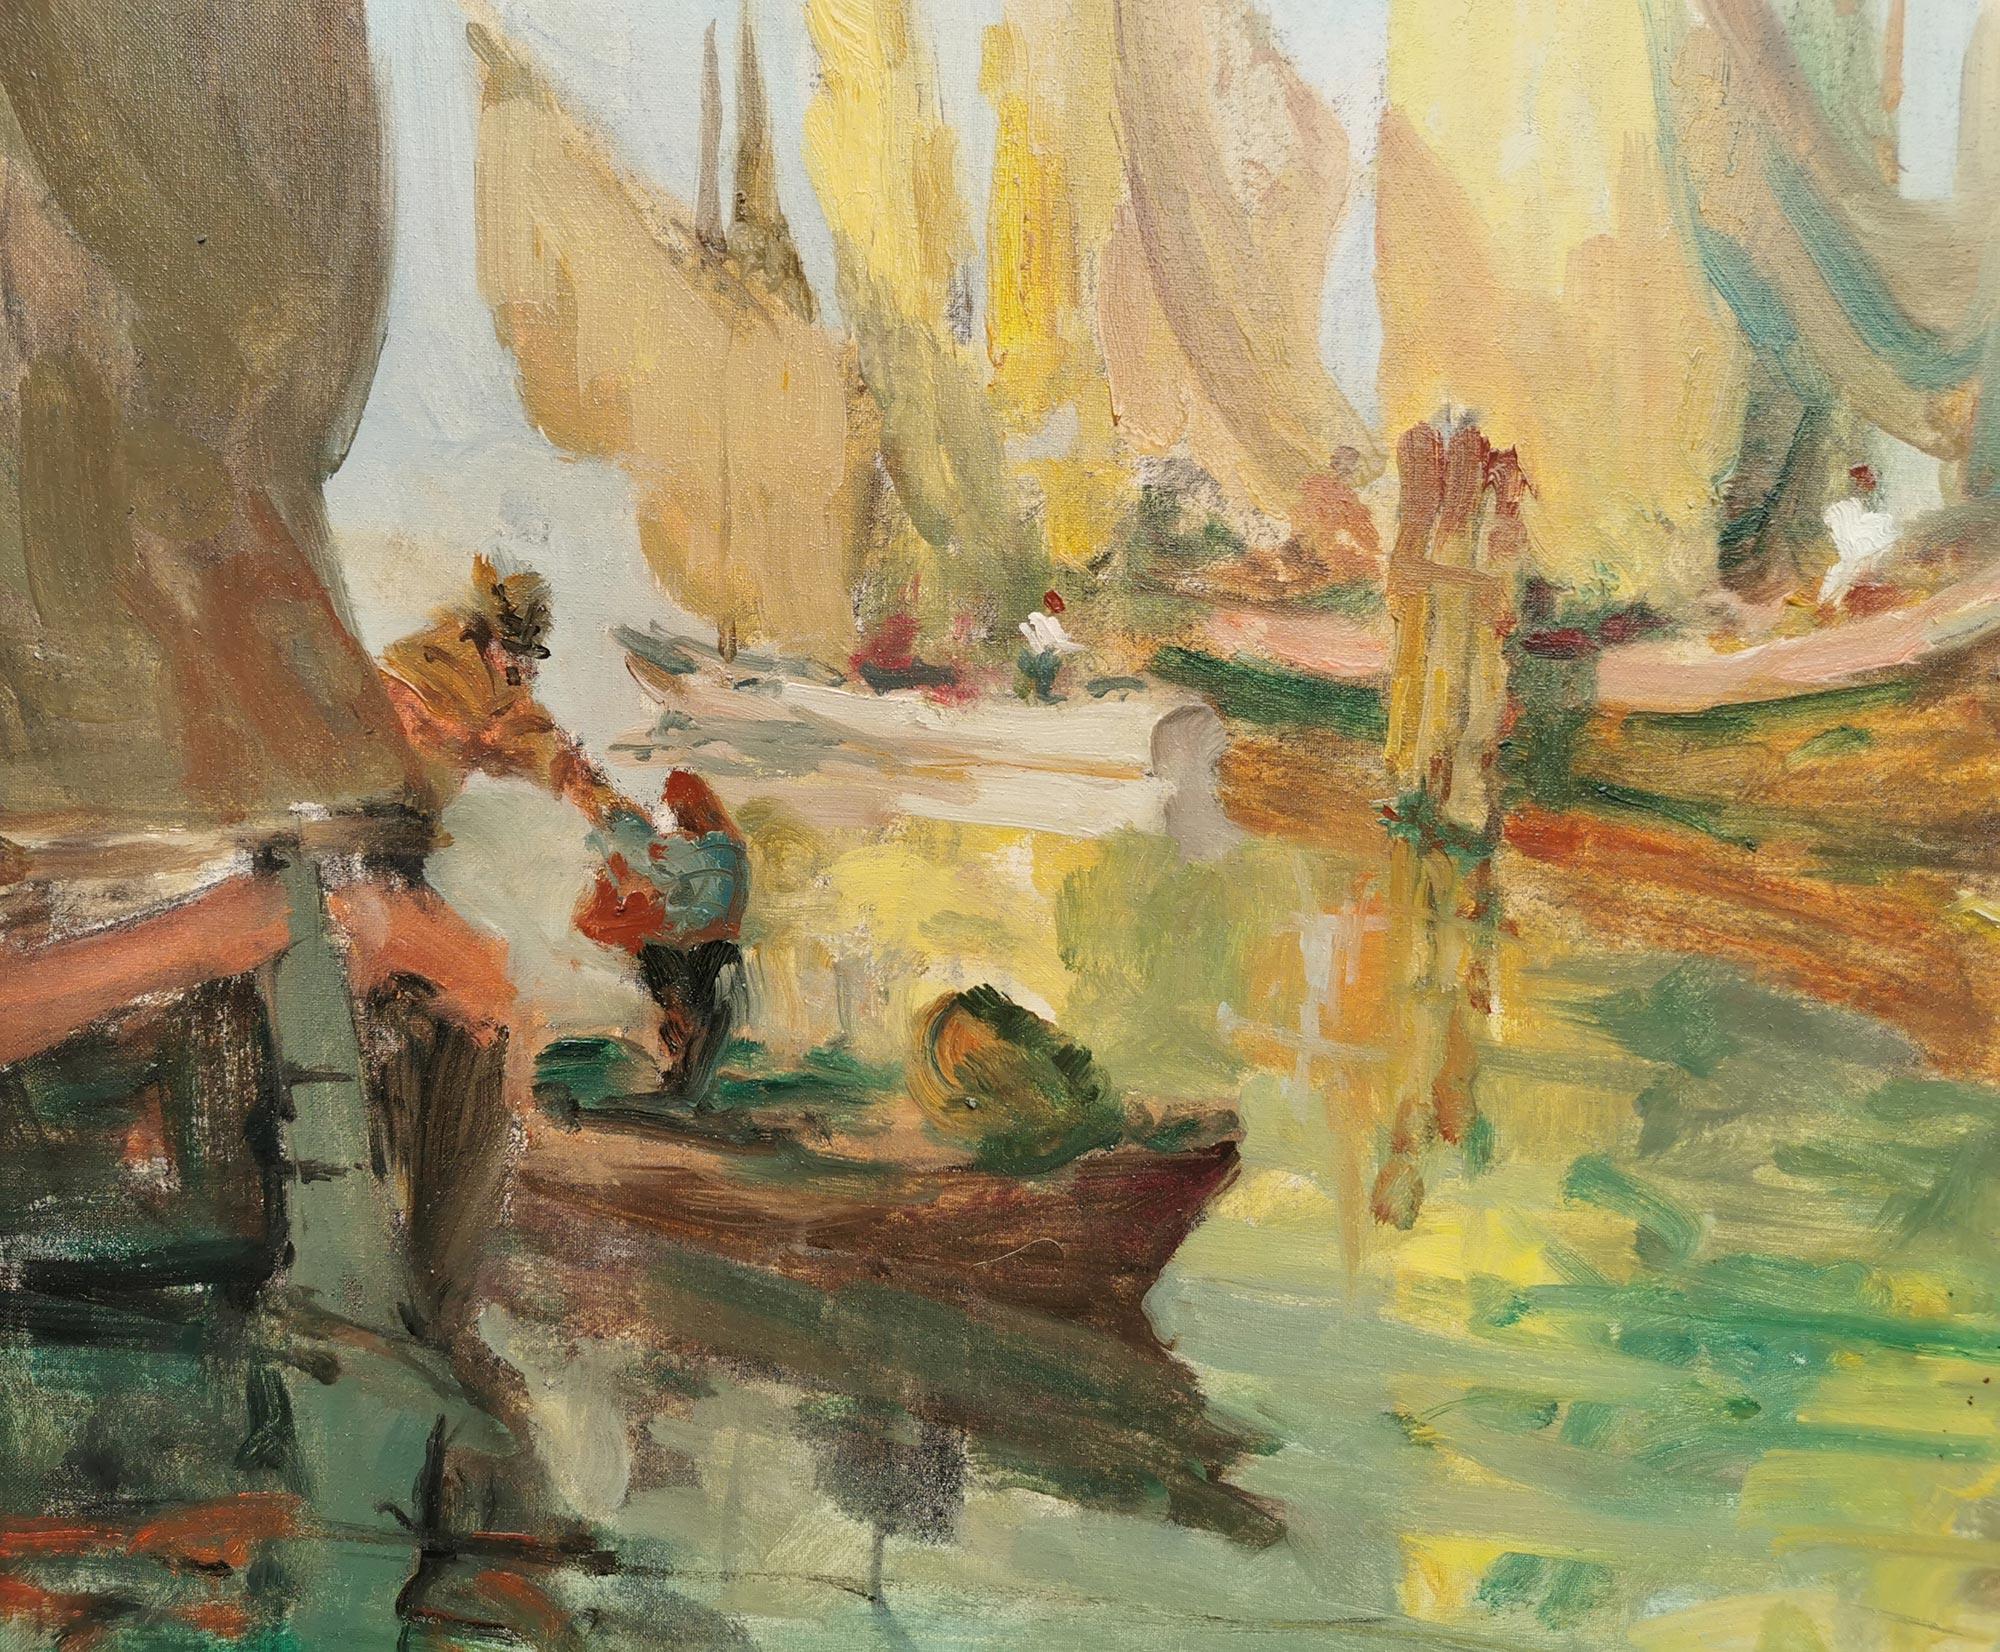 Boats in Venice Lagoon - Gianfranco Baldin

Measures: 50 x 70 cm - frame not included
60 c 80 cm - frame included
oil on canvas - 1950s

Bragozzi in the lagoon, the typical two-masted fishing boats of the upper Adriatic. In the nineteenth and